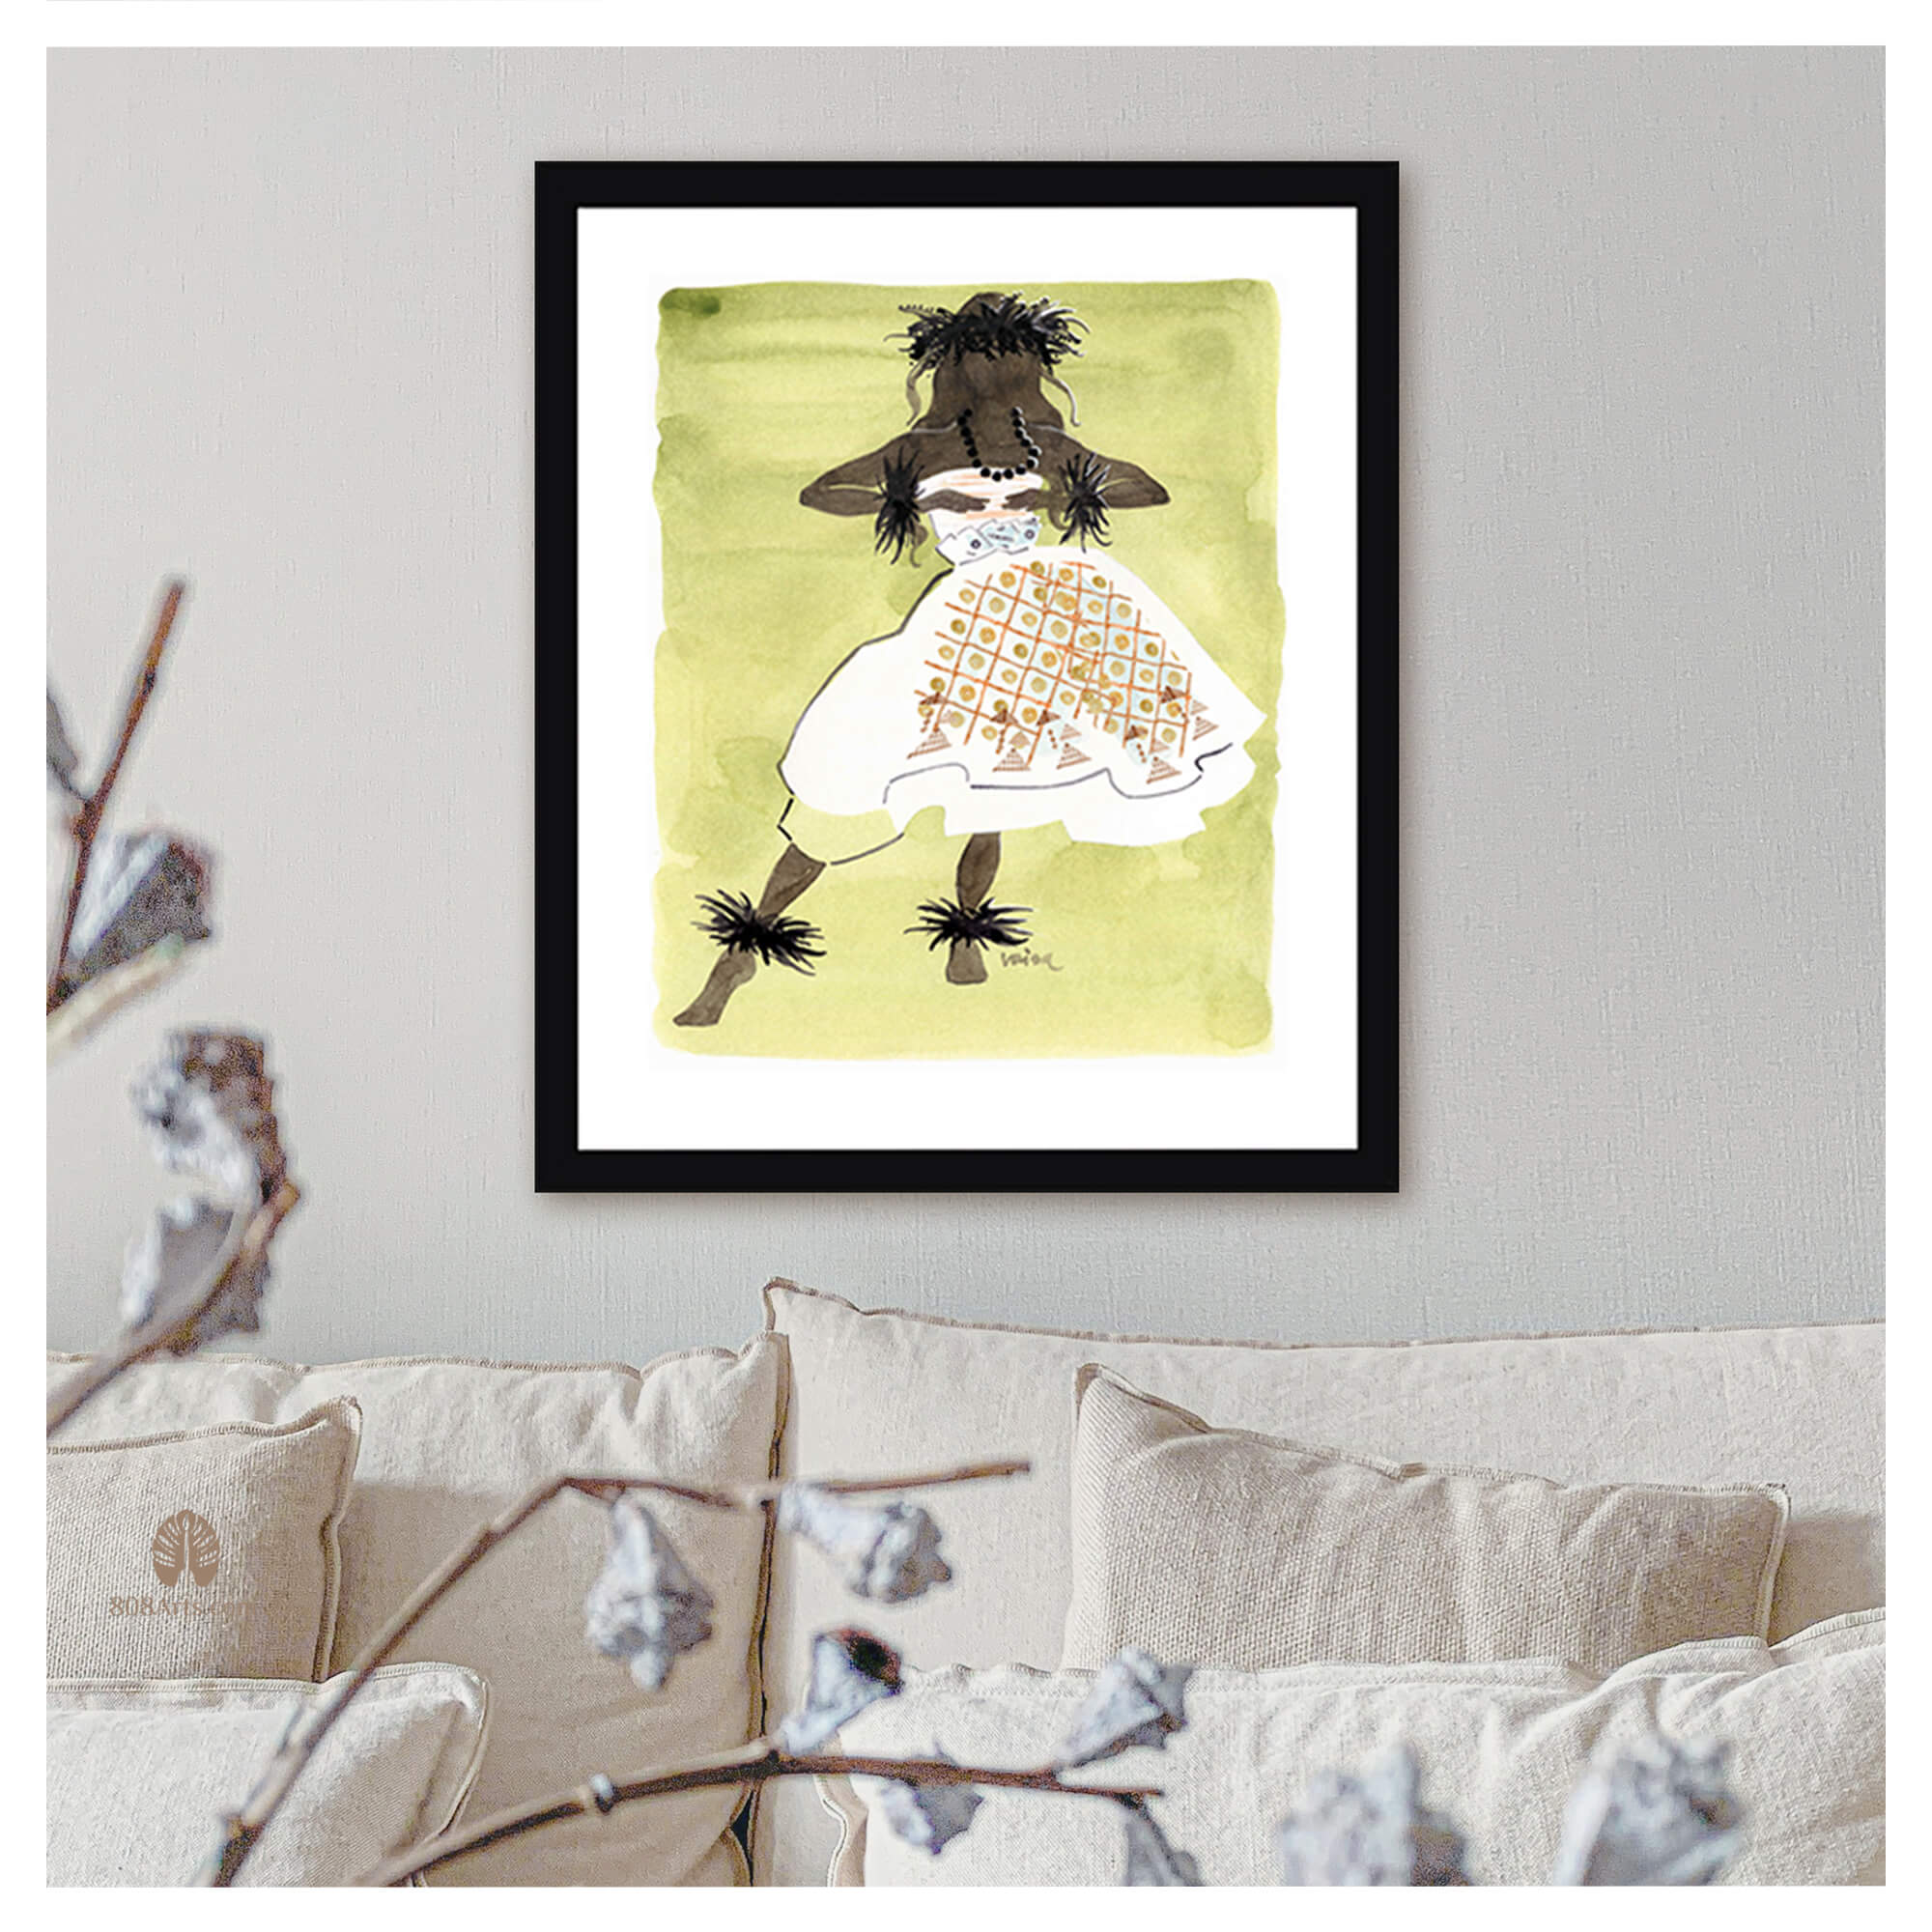 Framed paper giclée print featuring a watercolor artwork of a hula green on avocado green background by Hawaii artist Lovisa Oliv